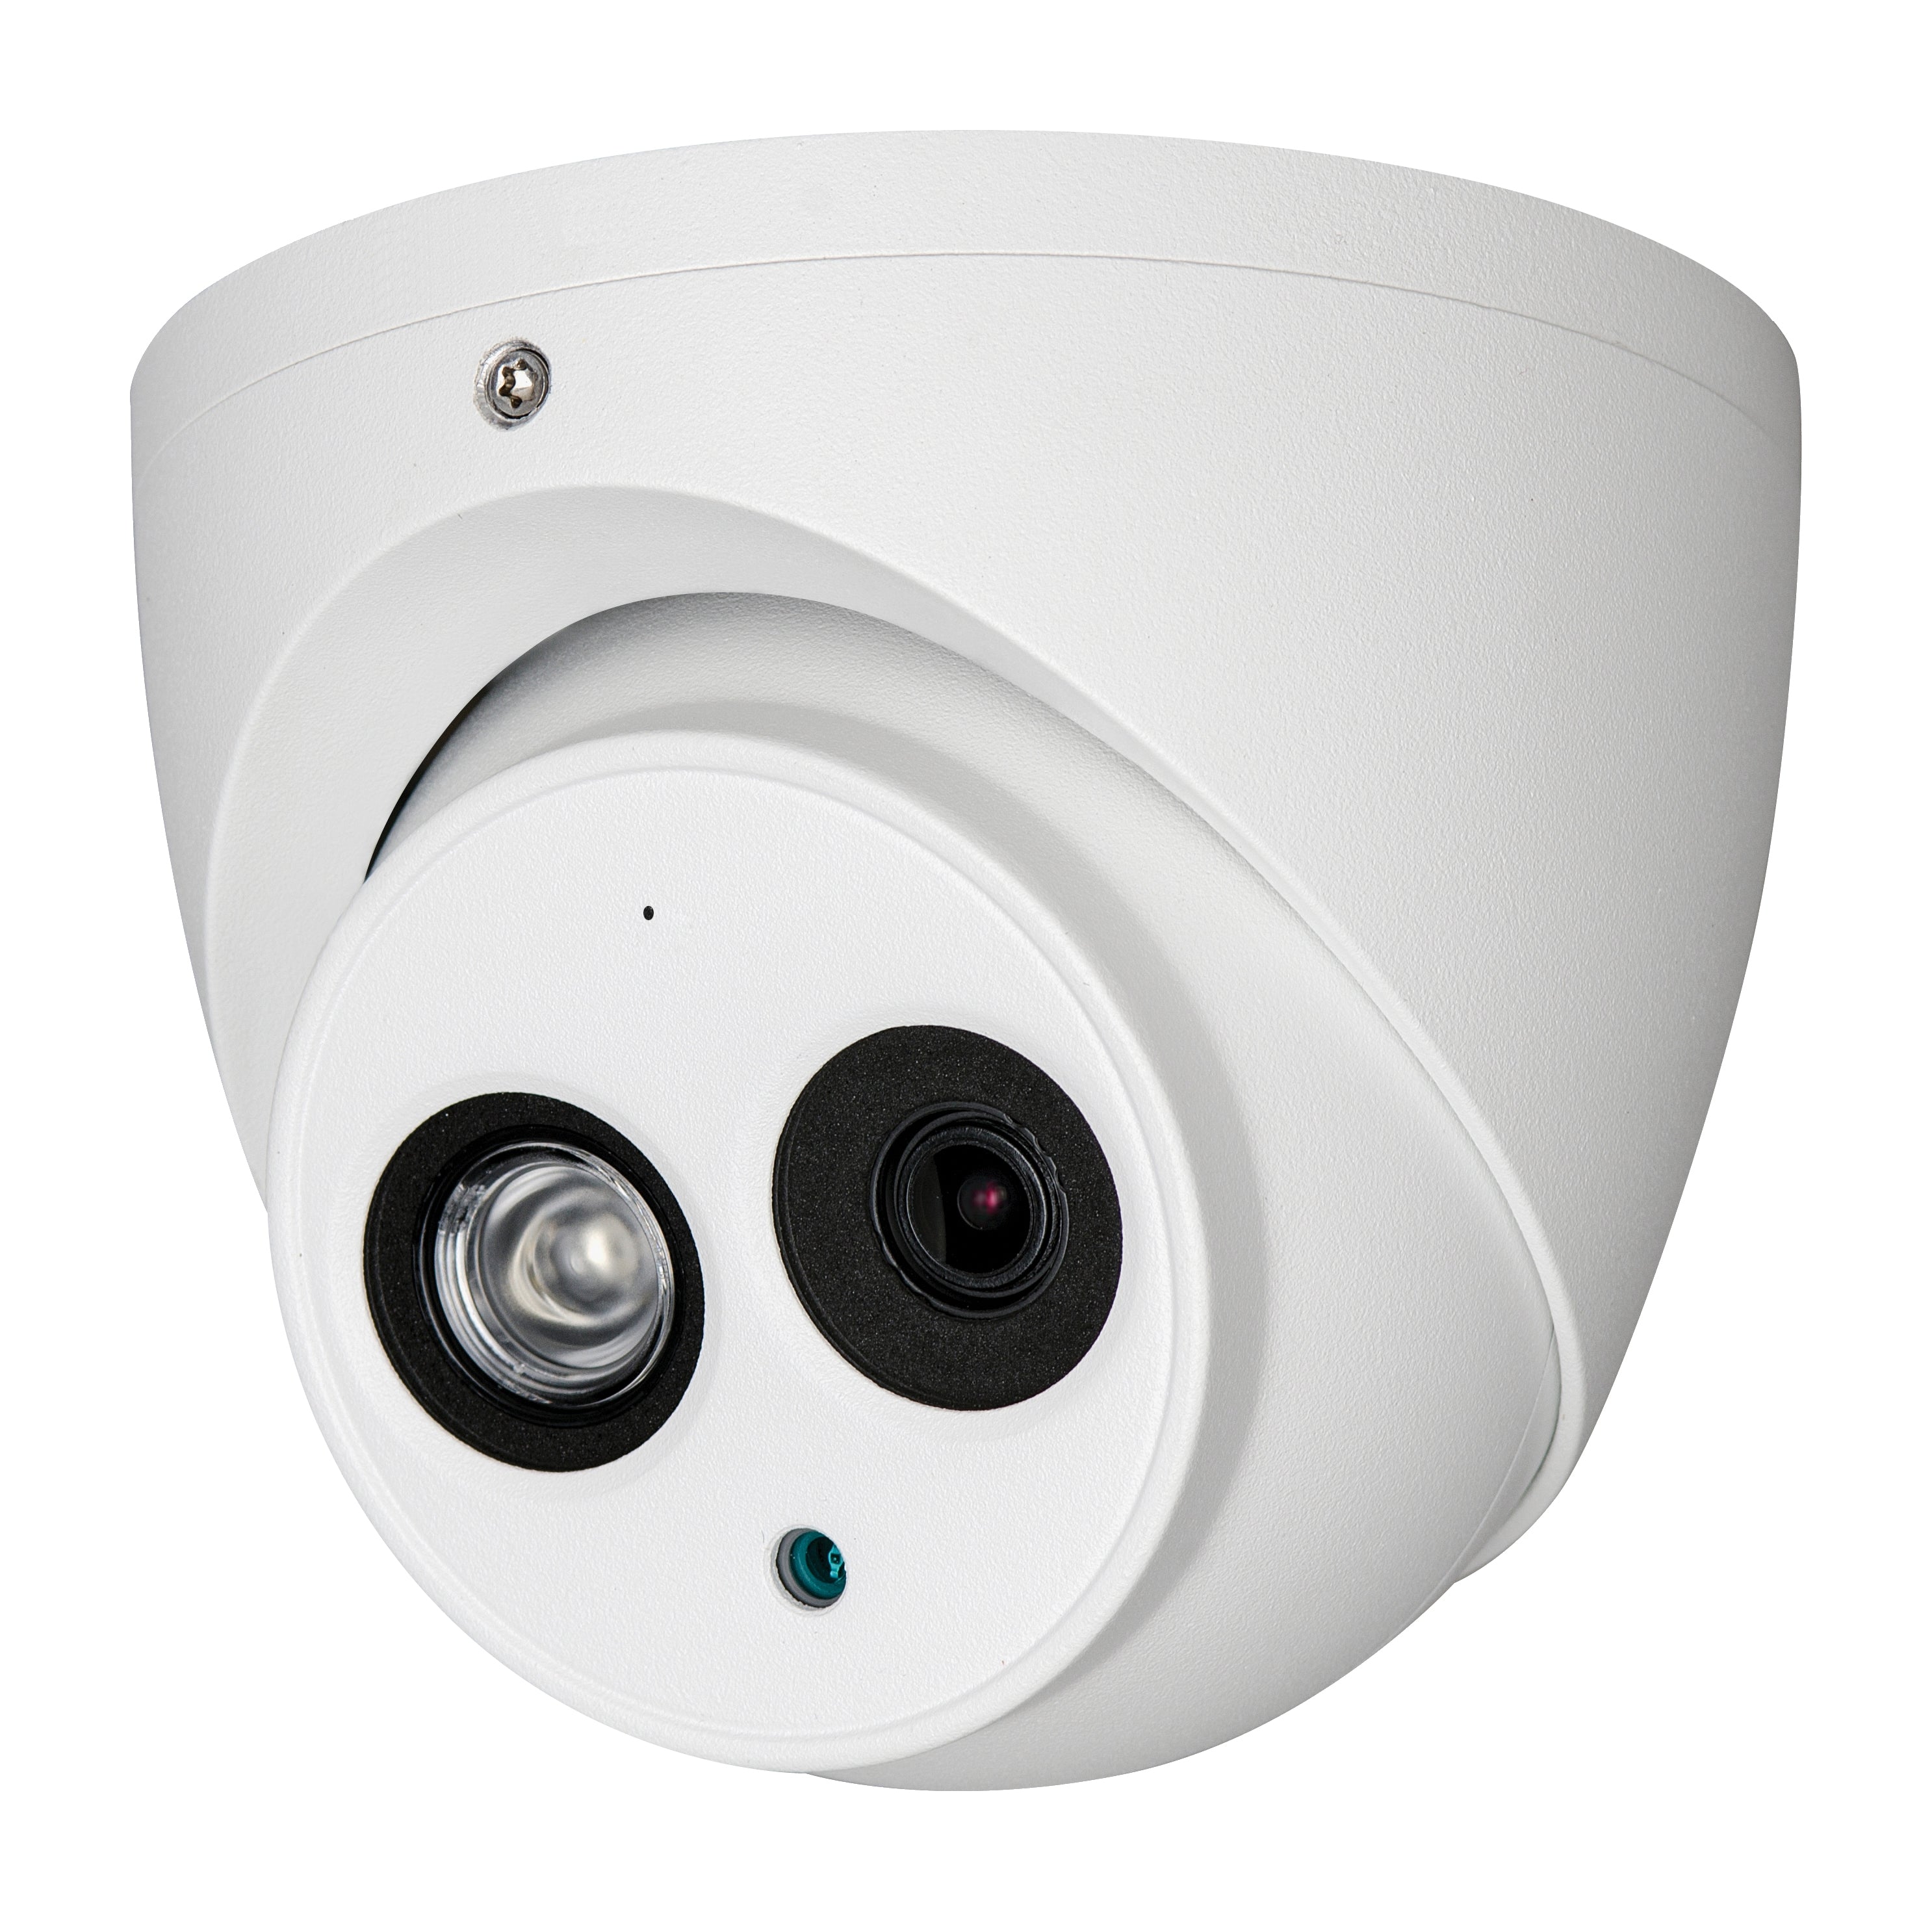 23-4D44A31EM-AS 4MP WDR IR Eyeball Face Detection Network Camera with Built-in MicroSD Card Slot & Mic